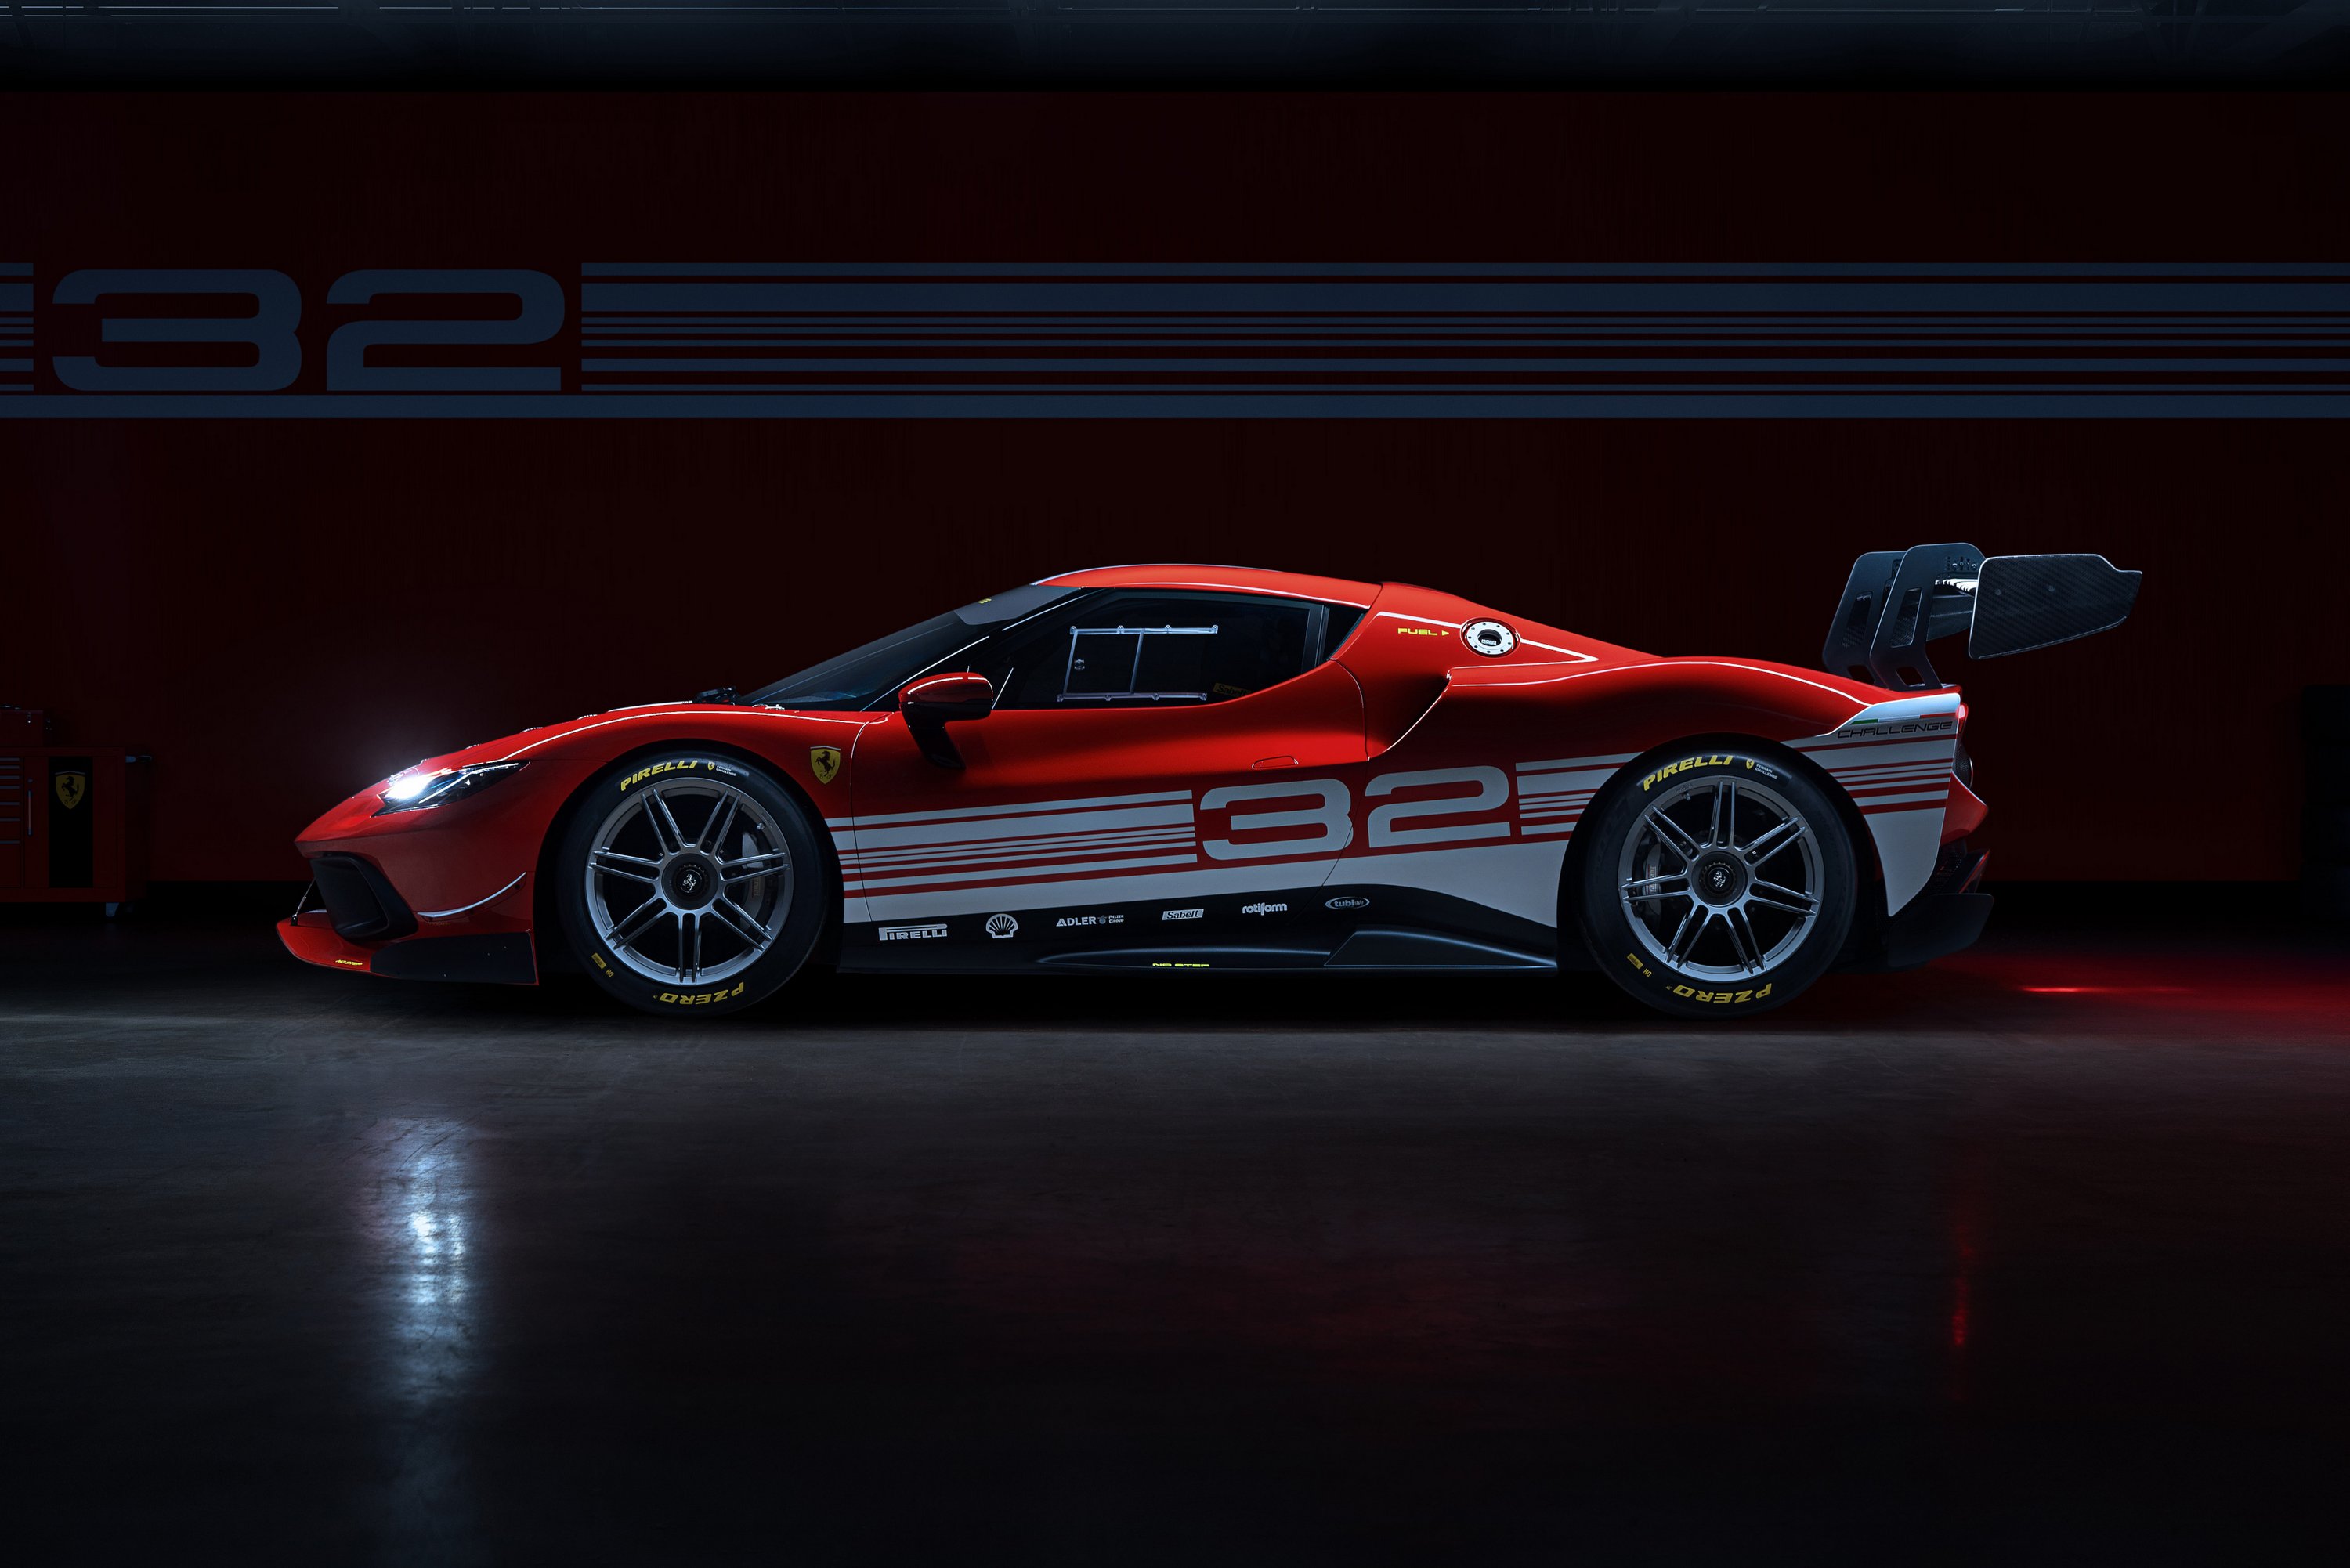 The new Ferrari 6 racing car storms the scene with a world record